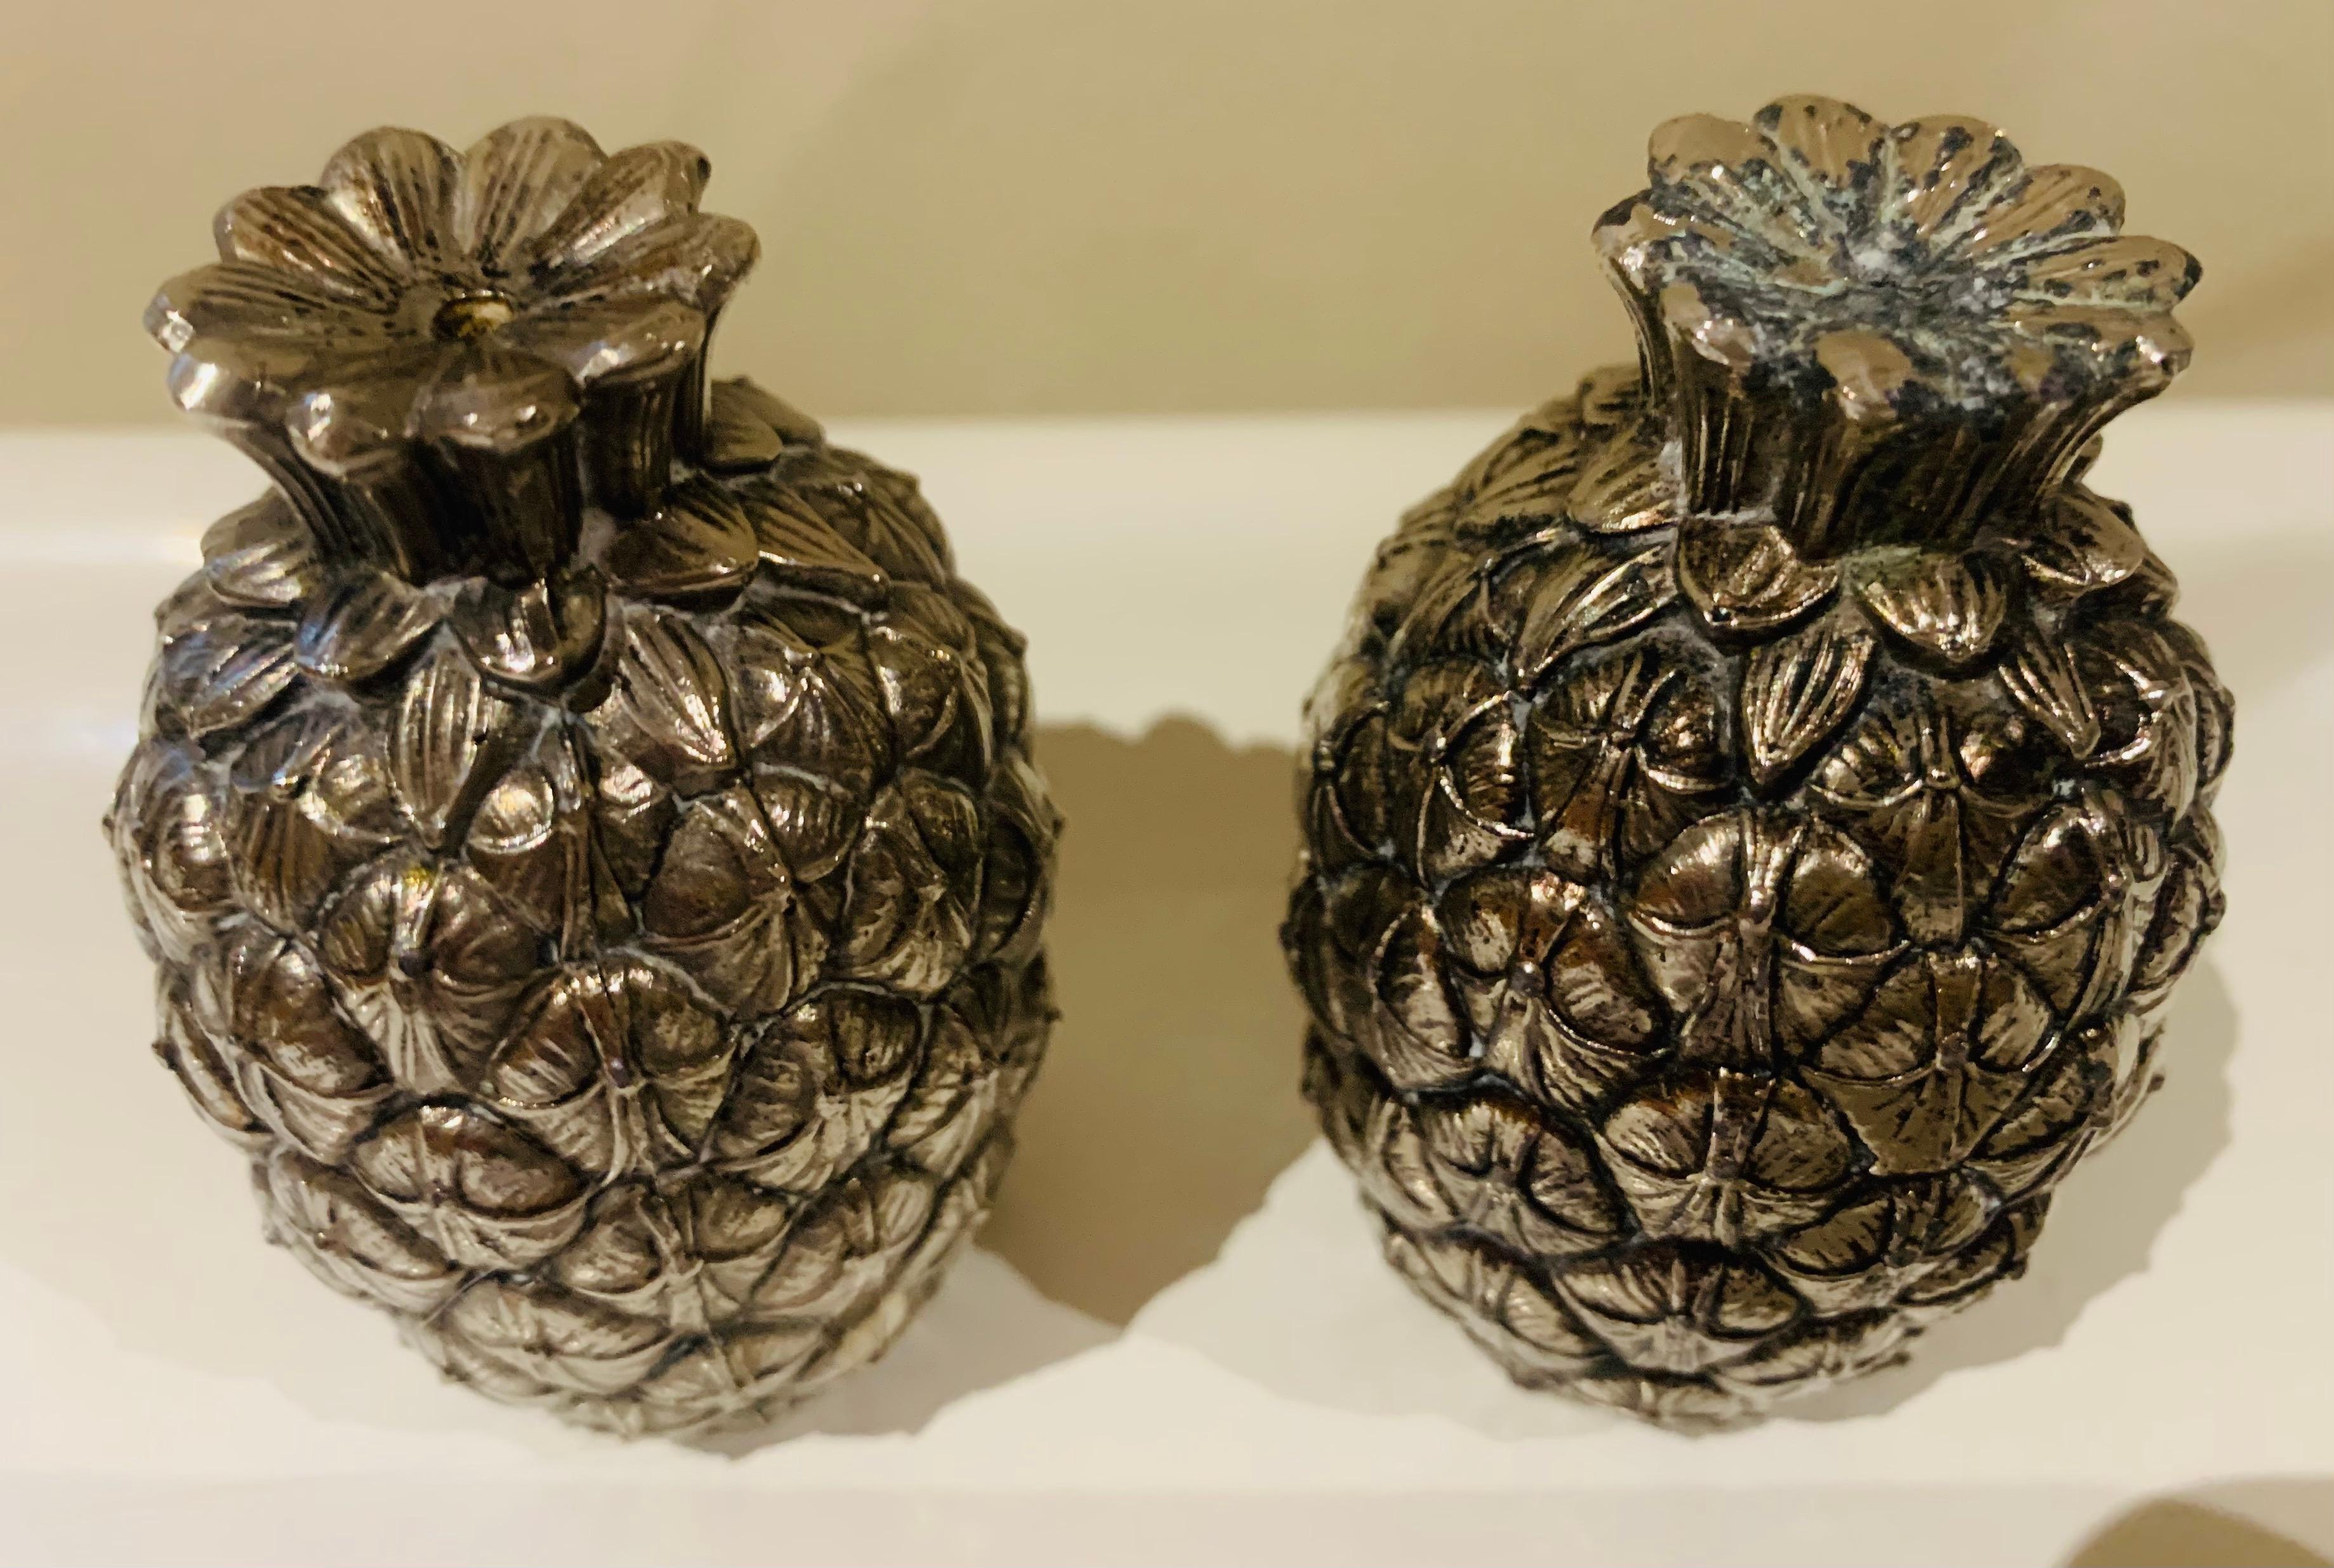 Polished 1970s Italian Mauro Manetti Firenze Silver-Plate Pineapple Salt & Pepper Shakers For Sale